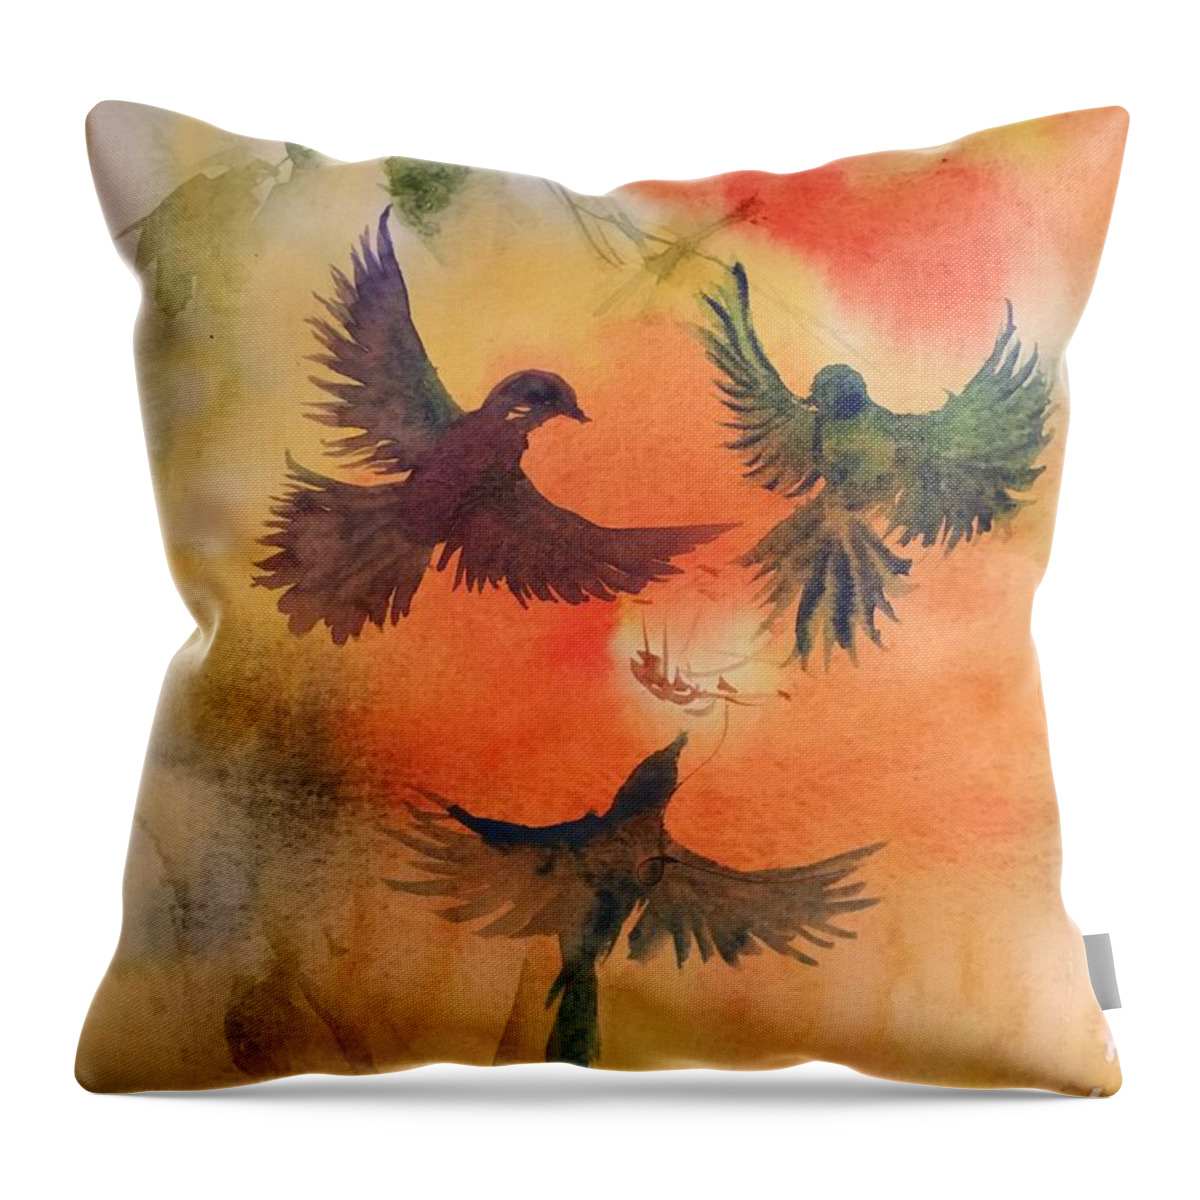 1232019 Throw Pillow featuring the painting 1232019 by Han in Huang wong